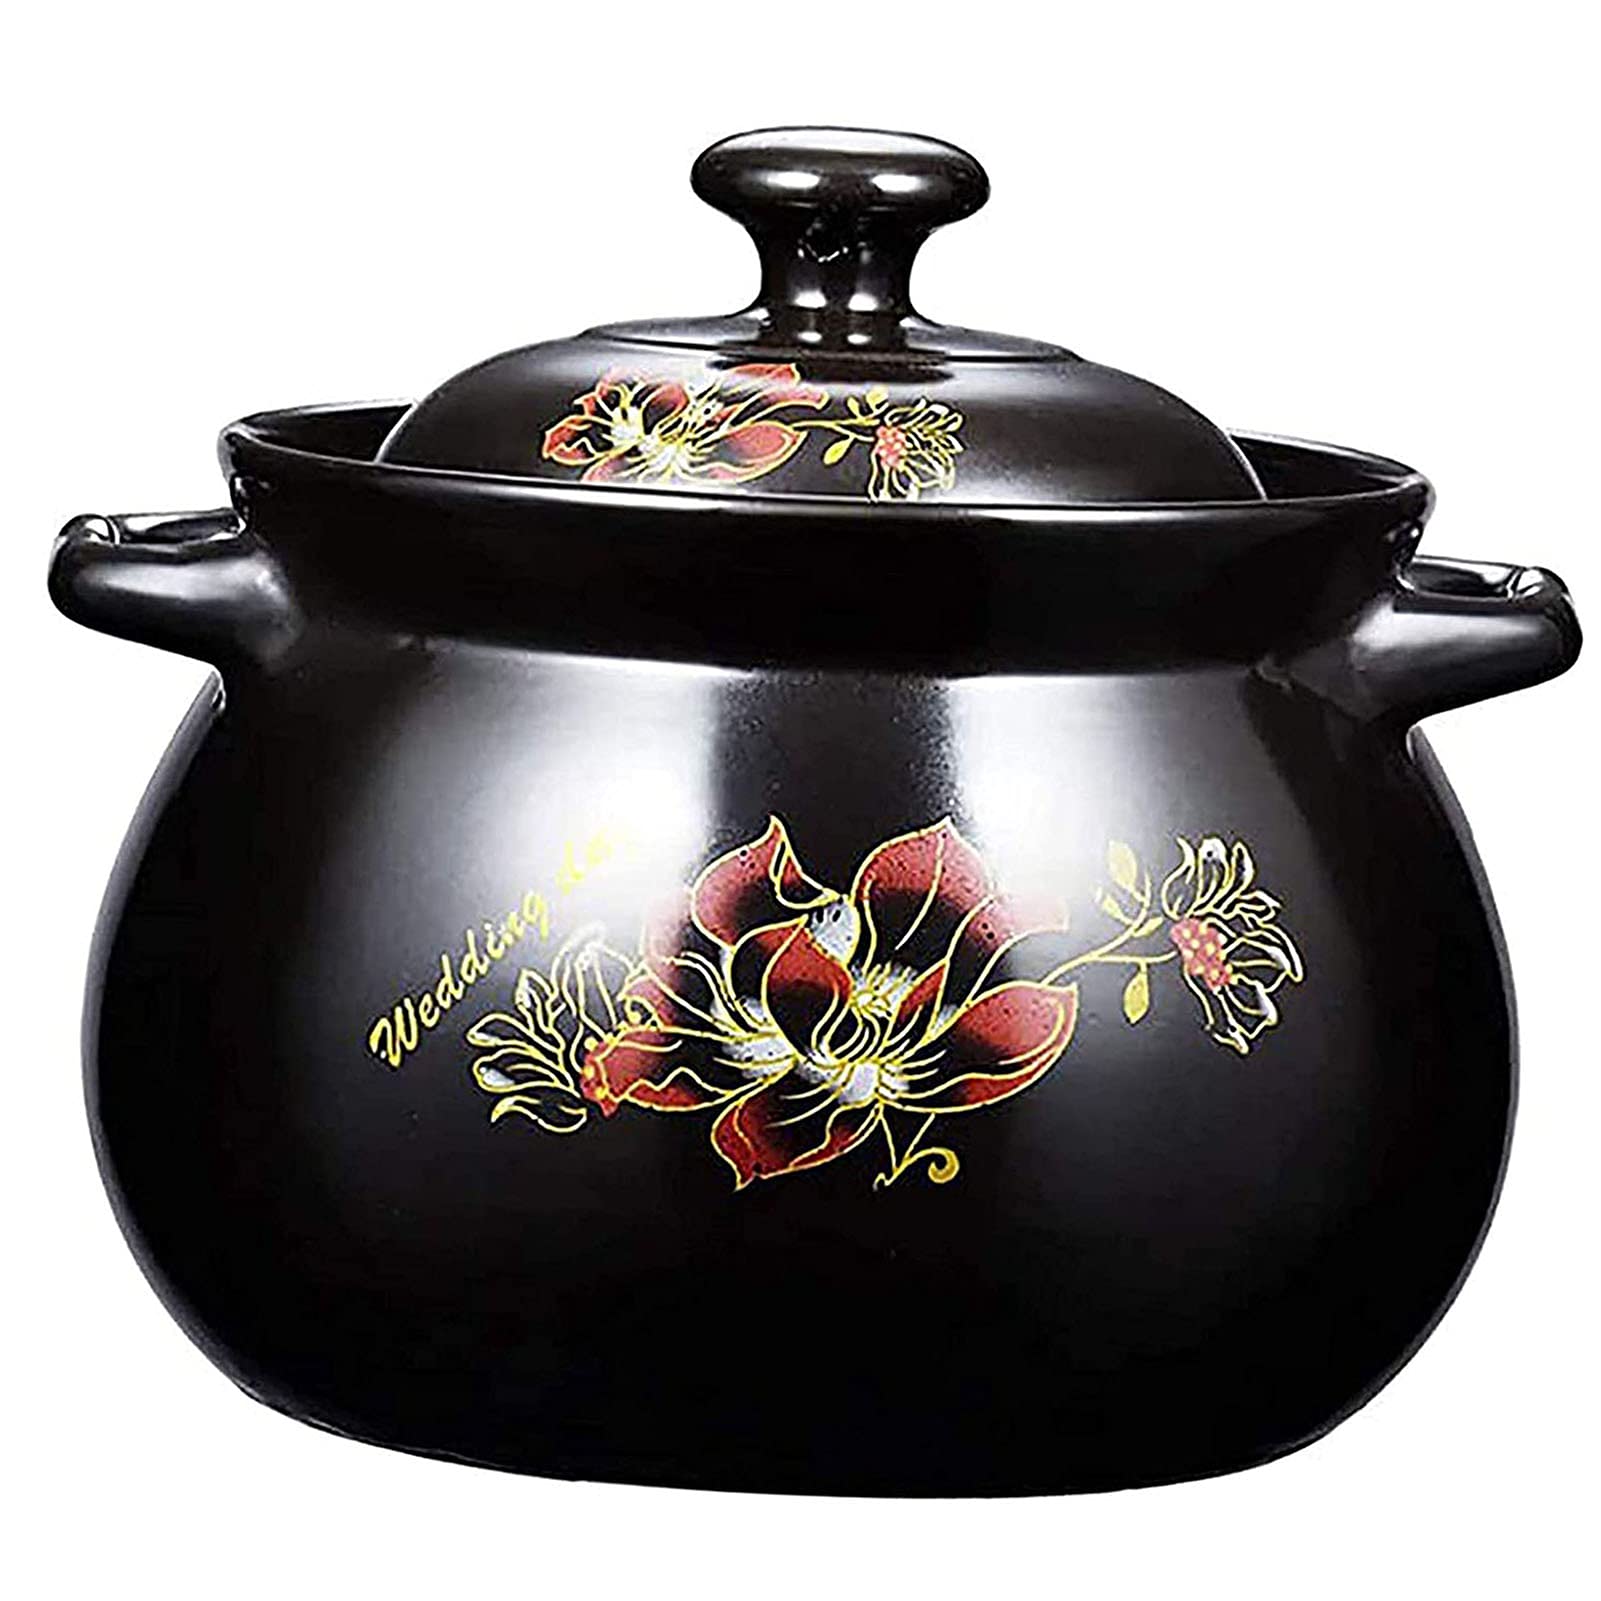 Hengqiyuan Clay Cooking Pots, Round Casserole Dish with Lid, Clay Pots for Cooking, Stockpot for Stew, Soup, Steam, Black, 5.5 L